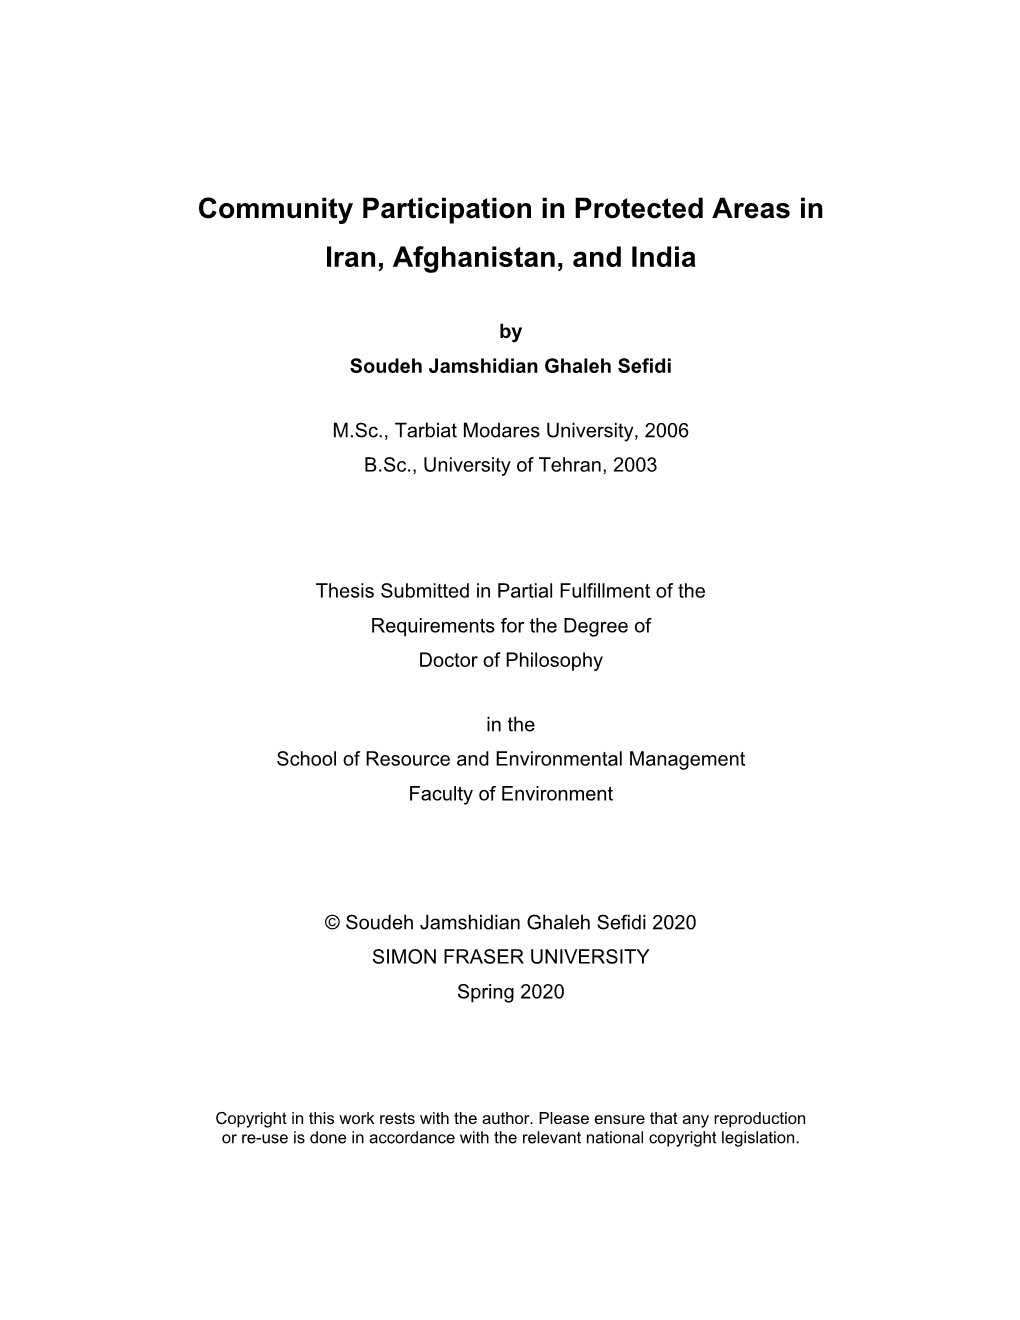 Community Participation in Protected Areas in Iran, Afghanistan, and India